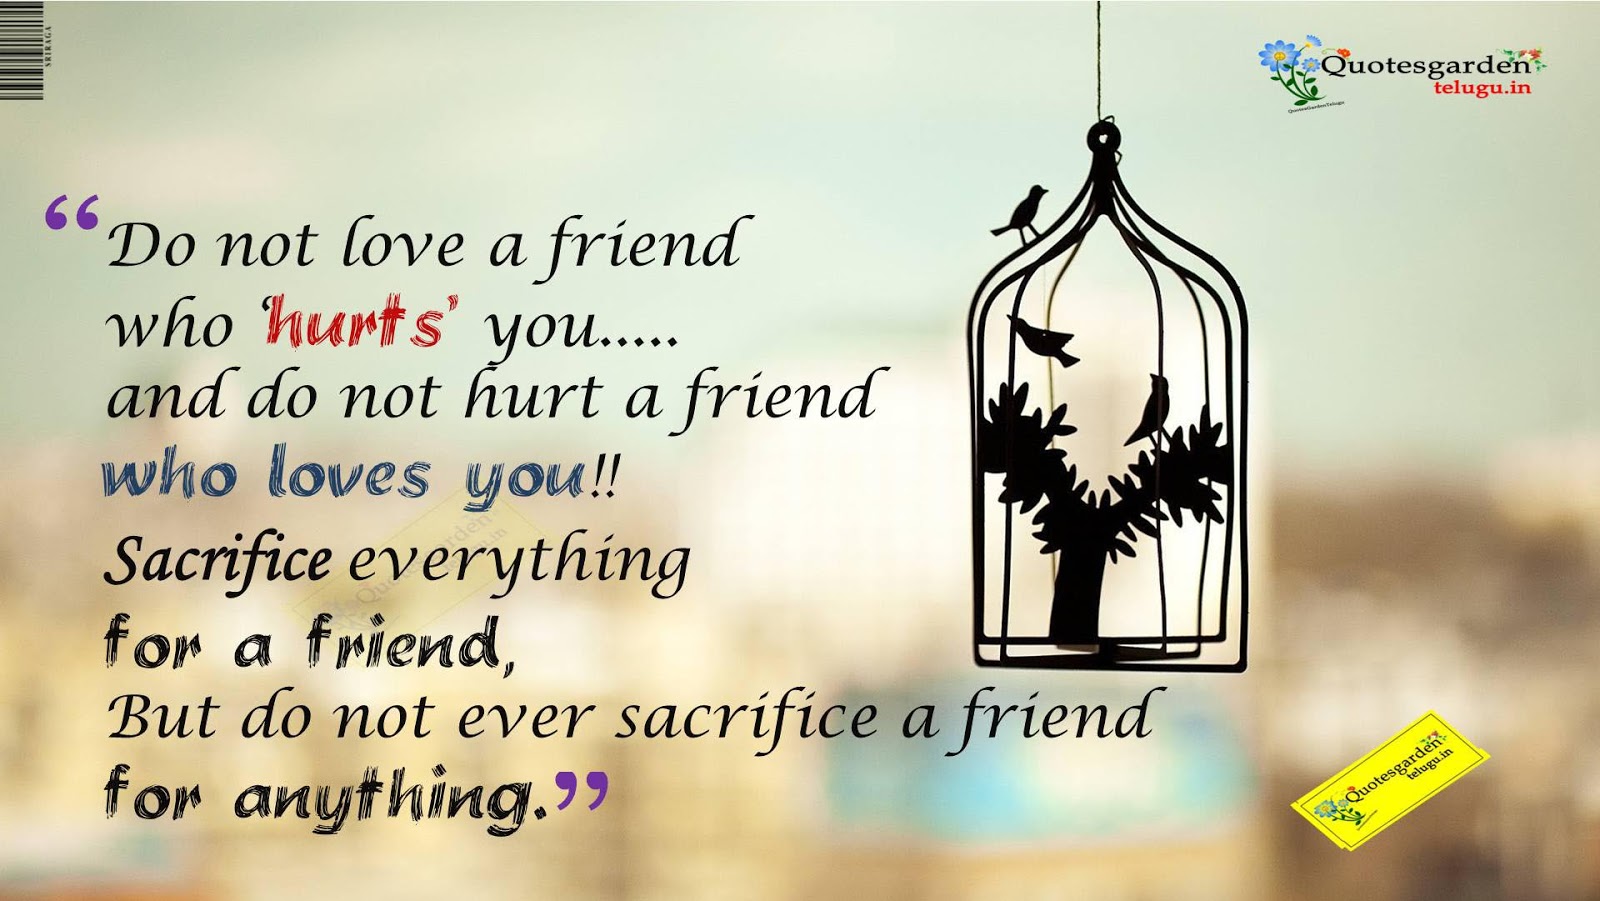 Best Heart Touching Friendship quotes with HD image 684. QUOTES GARDEN TELUGU. Telugu Quotes. English Quotes. Hindi Quotes